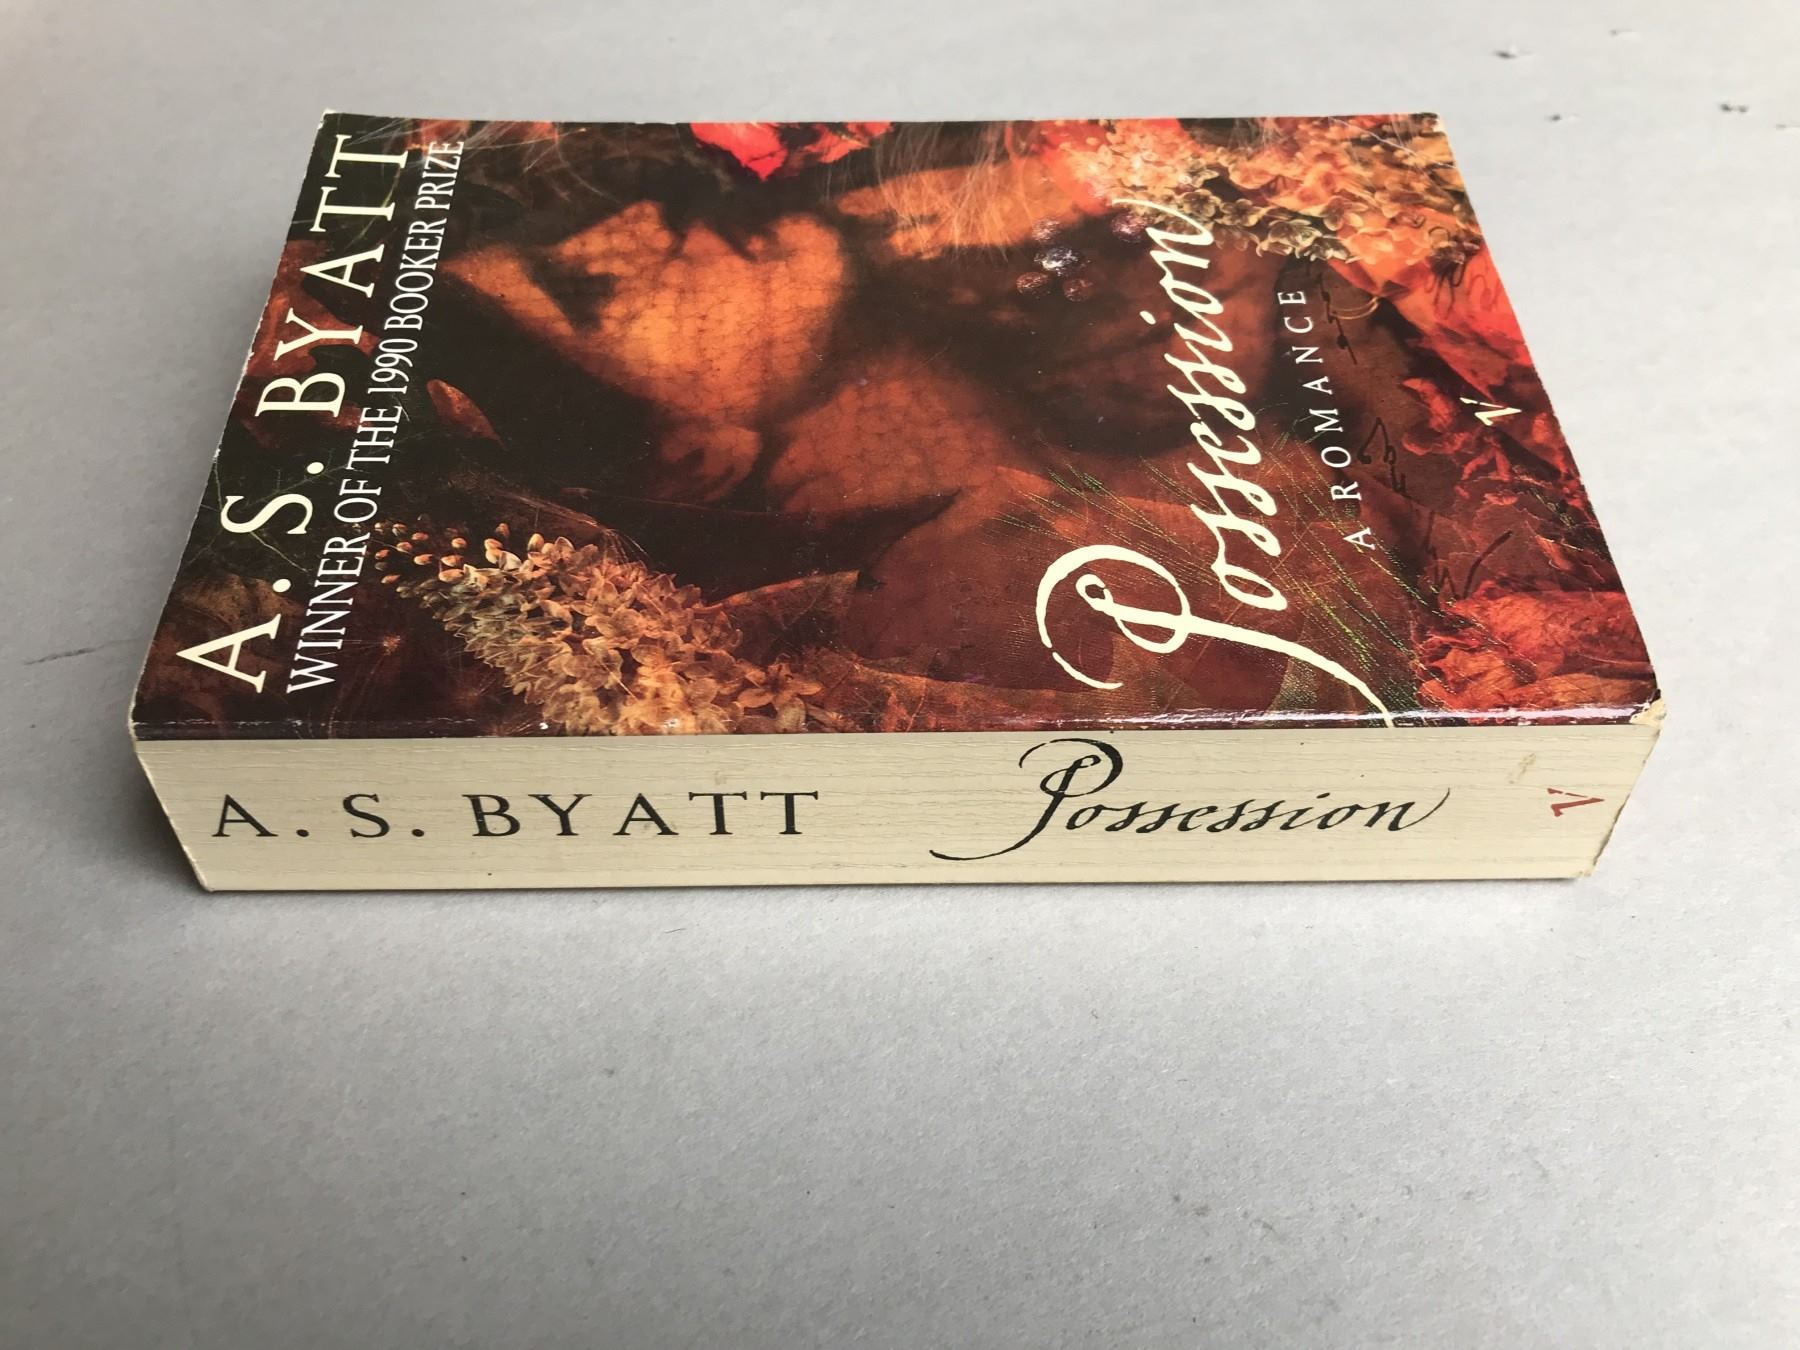 10-extraordinary-facts-about-possession-a-s-byatt